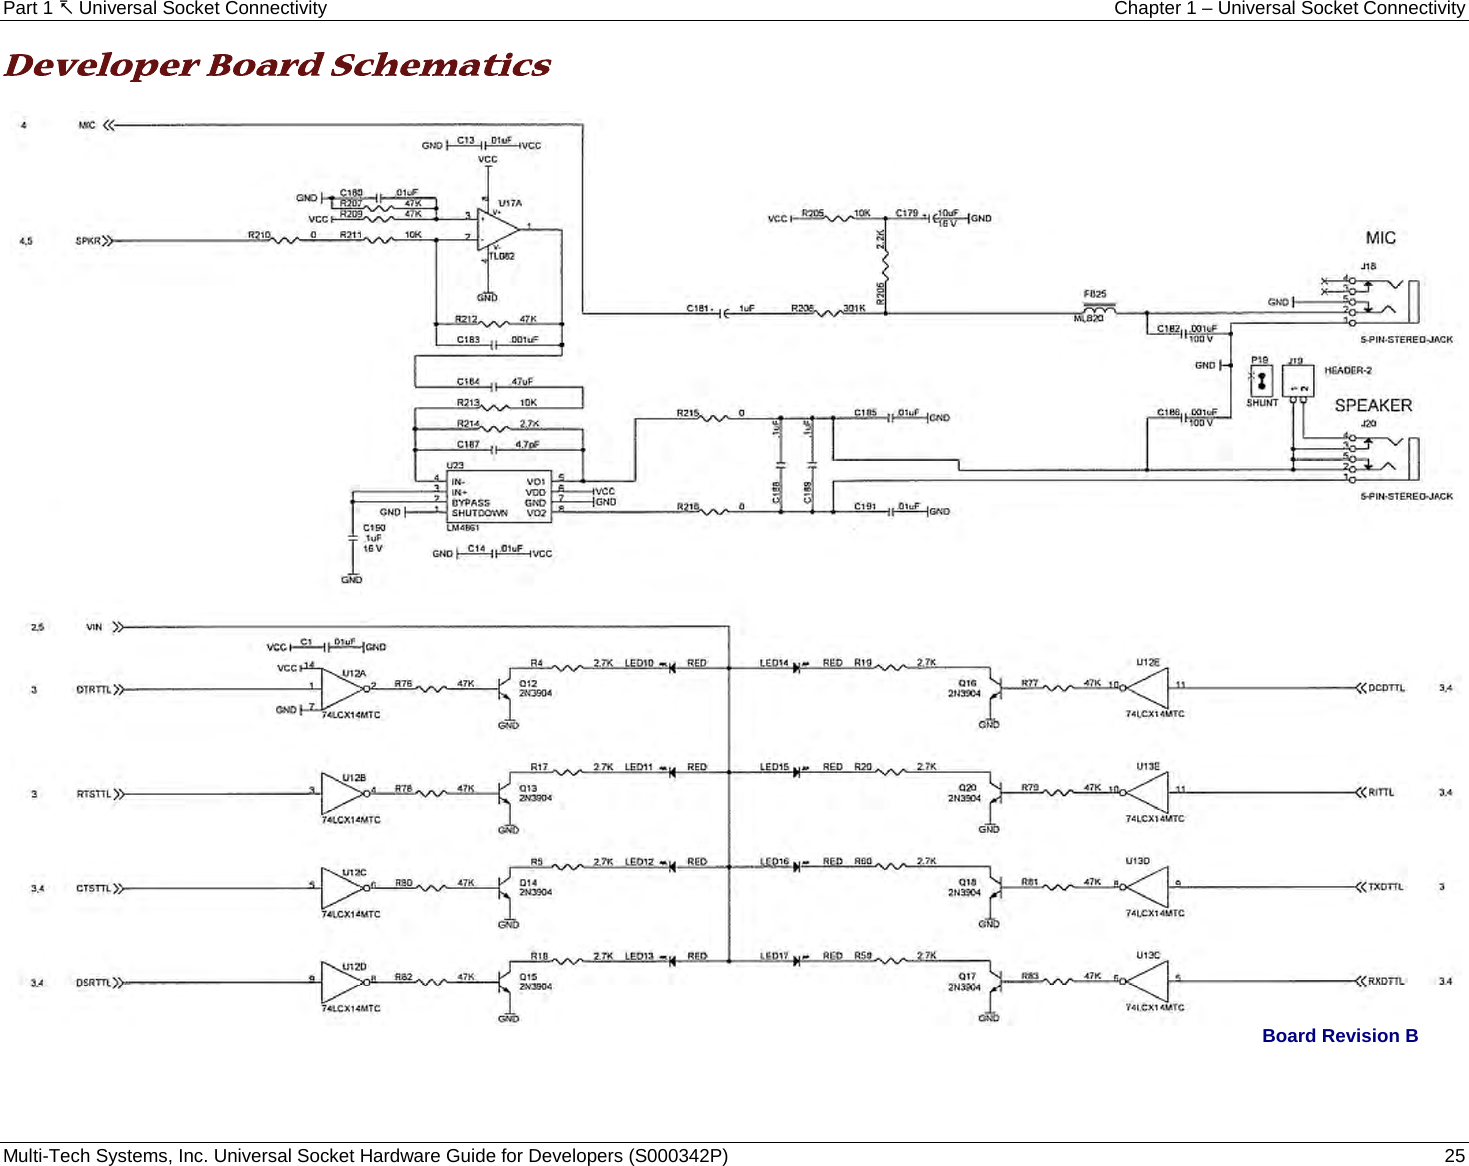 Part 1  Universal Socket Connectivity Chapter 1 – Universal Socket Connectivity Multi-Tech Systems, Inc. Universal Socket Hardware Guide for Developers (S000342P)  25  Developer Board Schematics   Board Revision B   